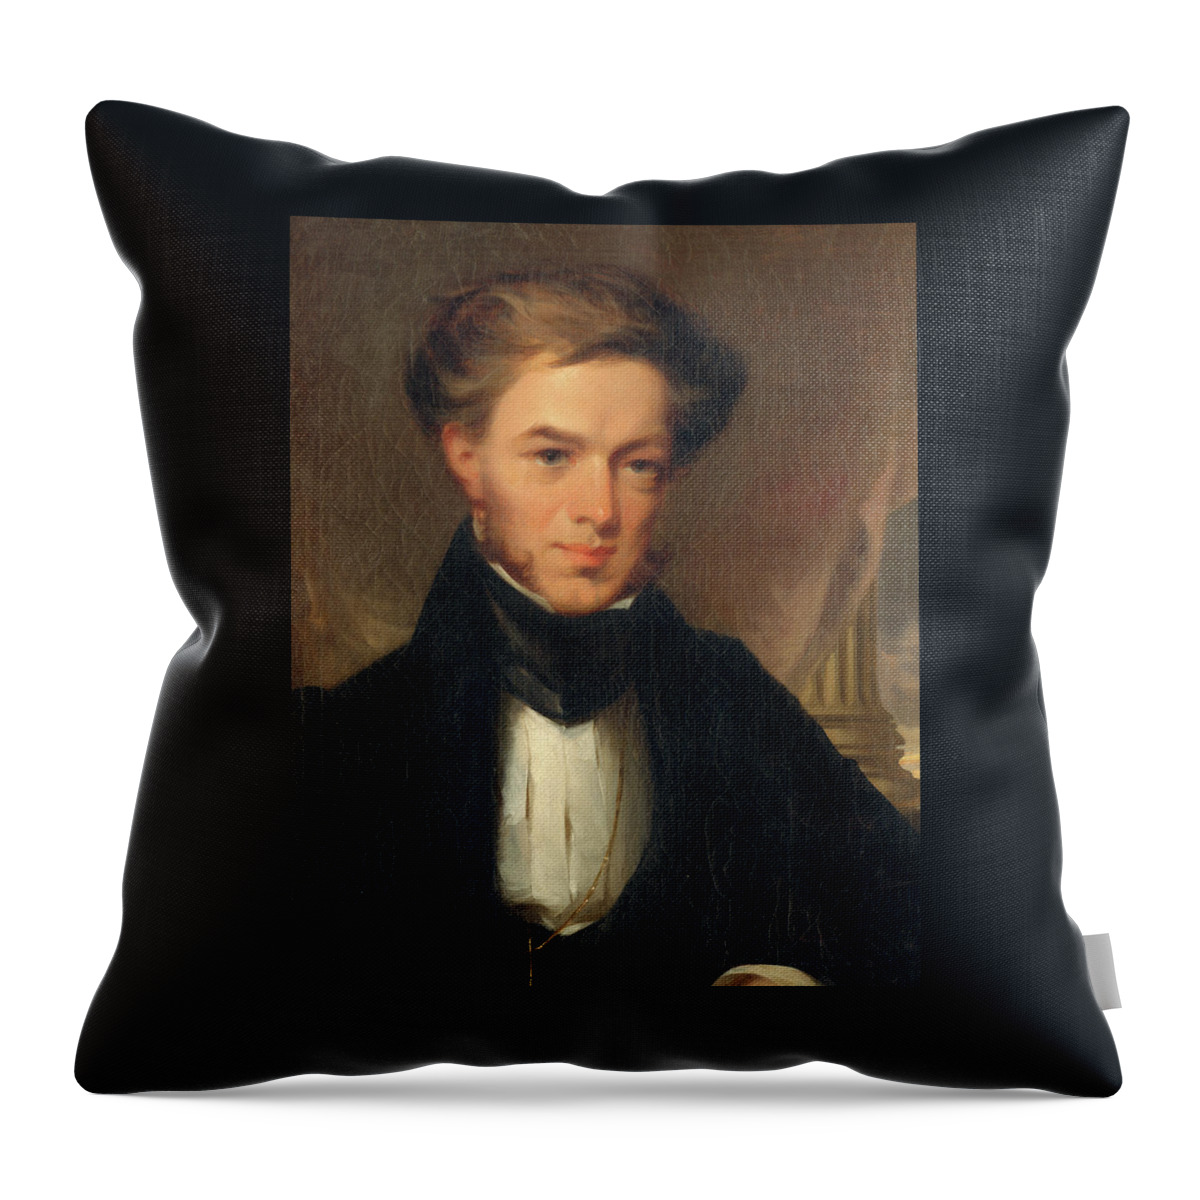 Philadelphia Throw Pillow featuring the painting Portrait of Thomas Ustick Walter, 1835 by John Neagle